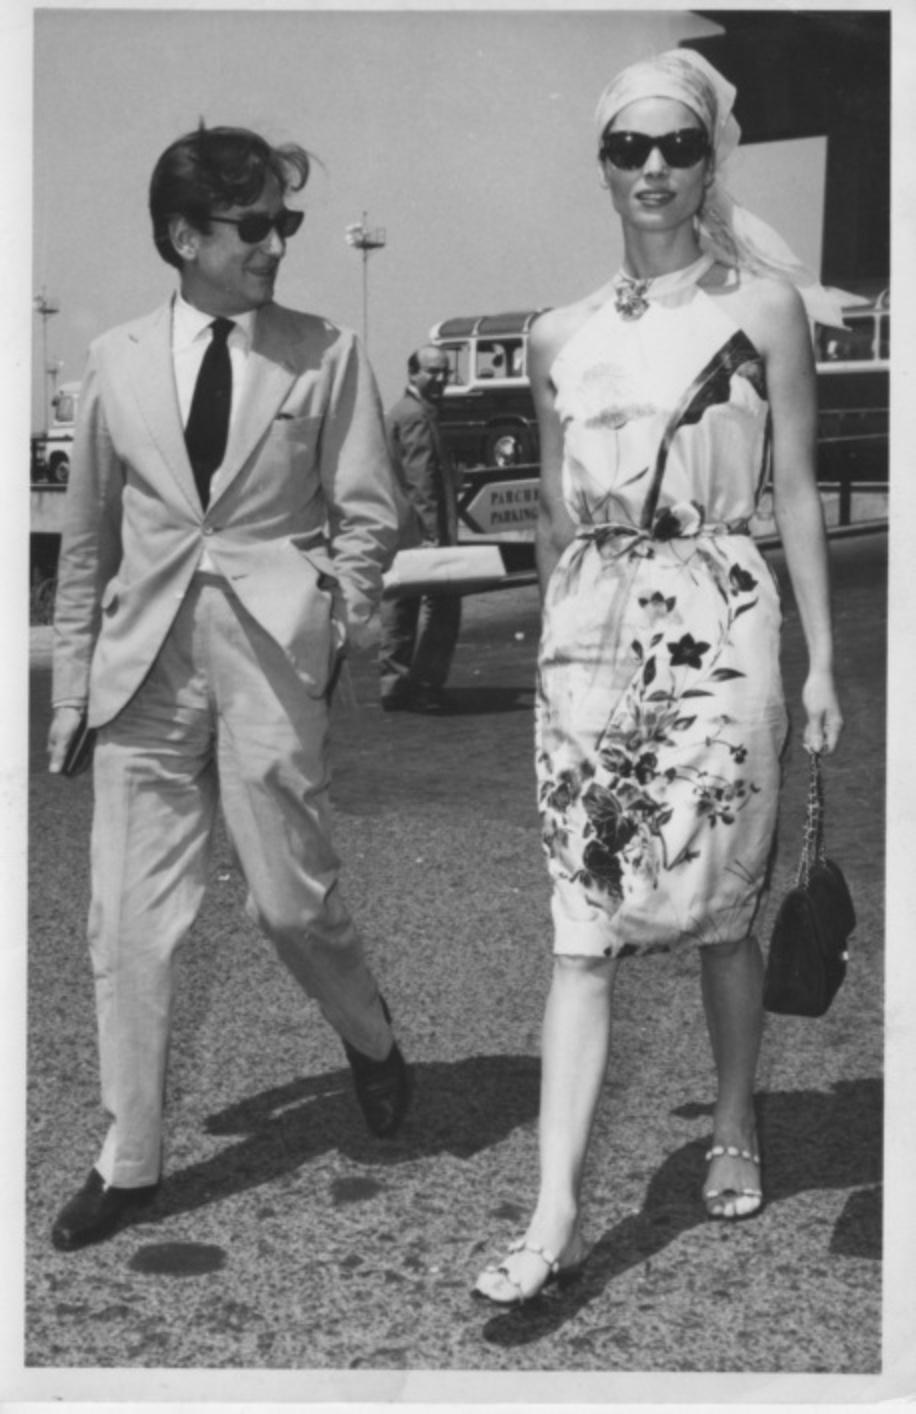 Unknown Figurative Photograph - The Italian Actress Elsa Martinelli with Willy Rizzo - Vintage Photo - 1960s